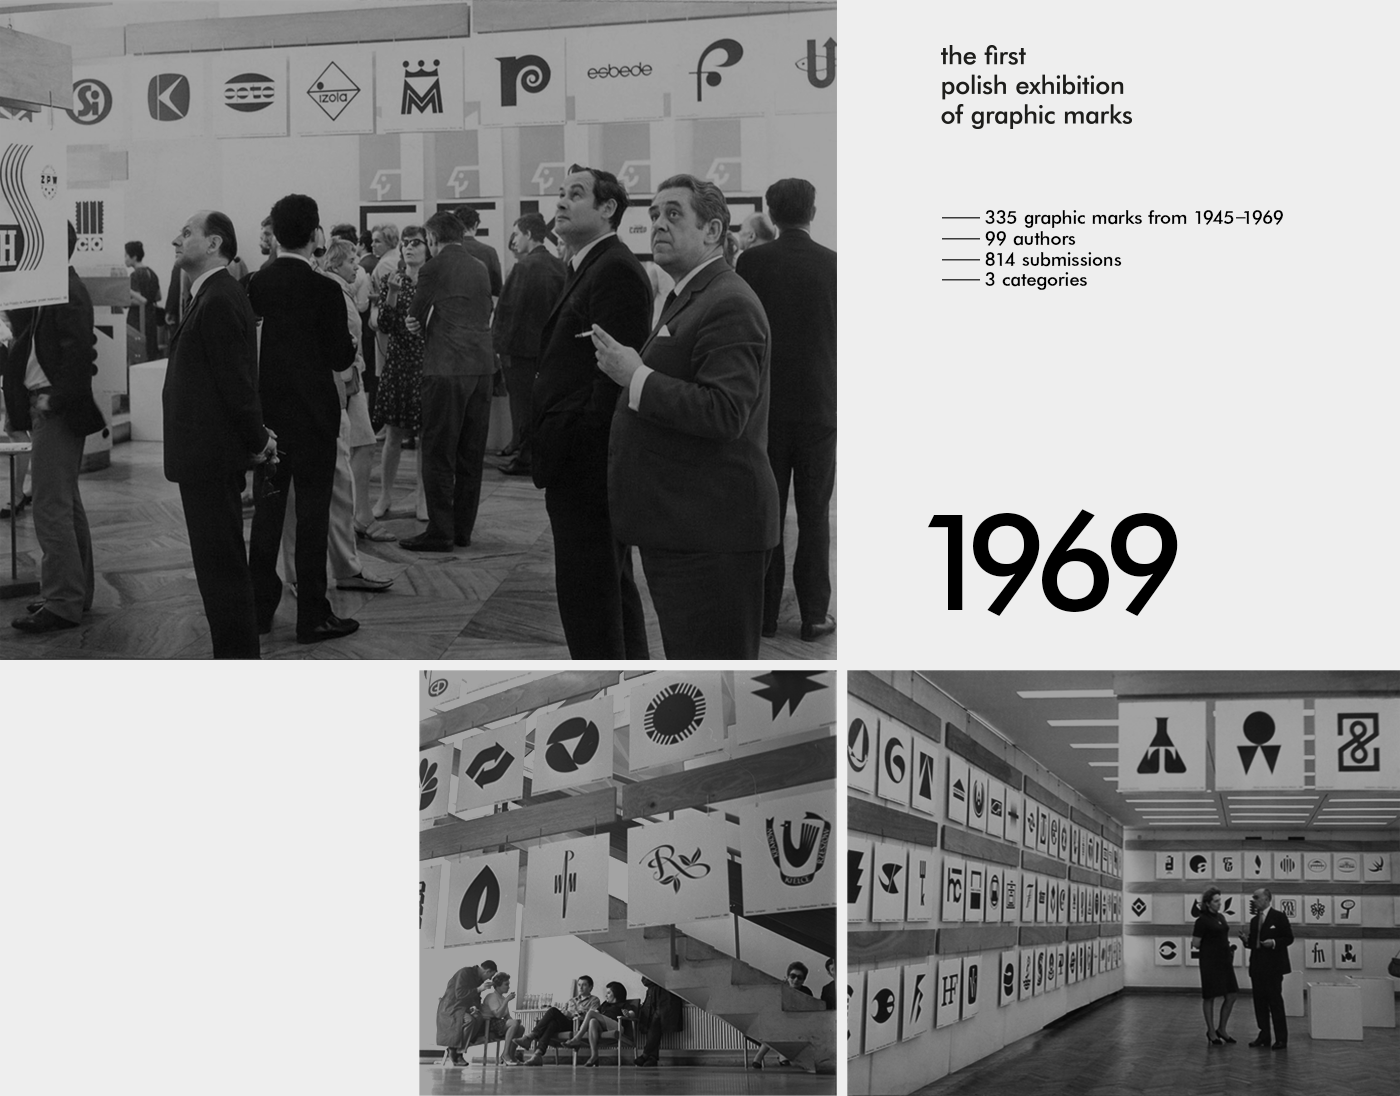 Polish Exhibition of Graphic Marks 1969